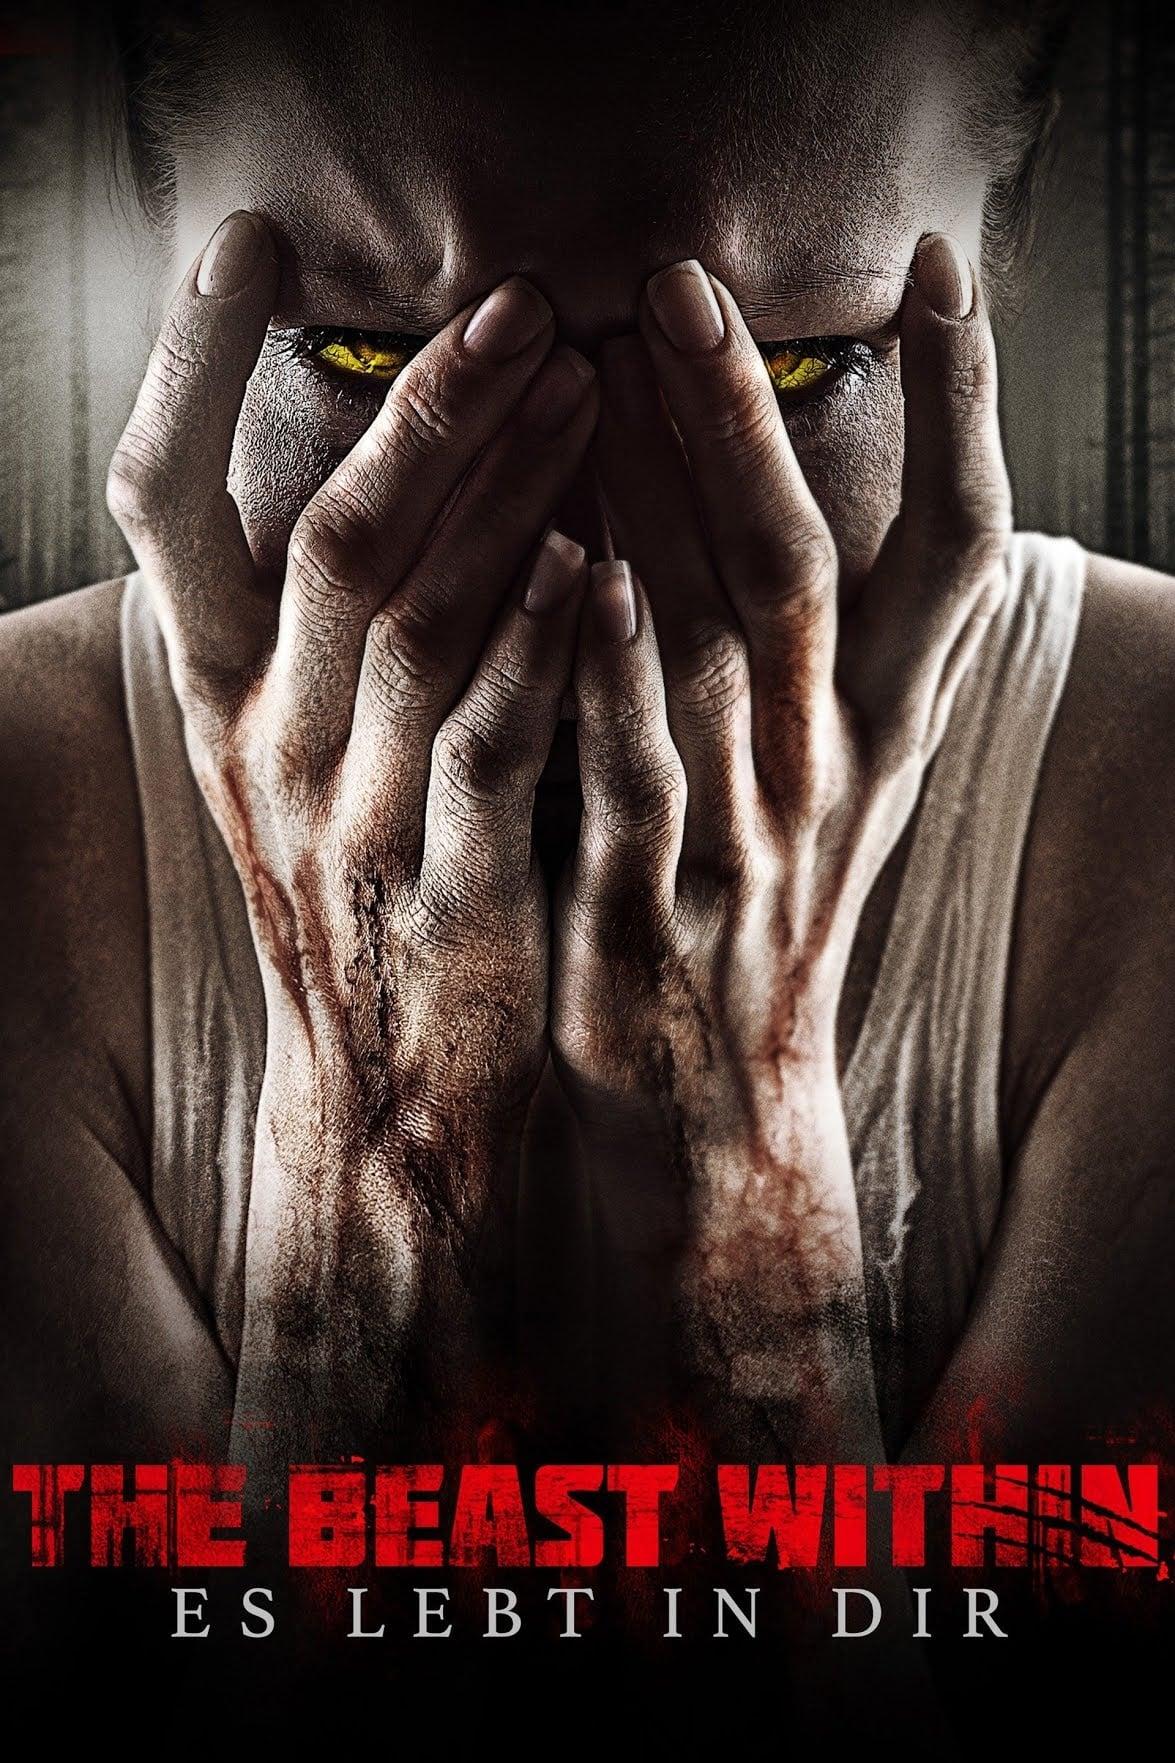 The Beast Within - Es lebt in dir poster